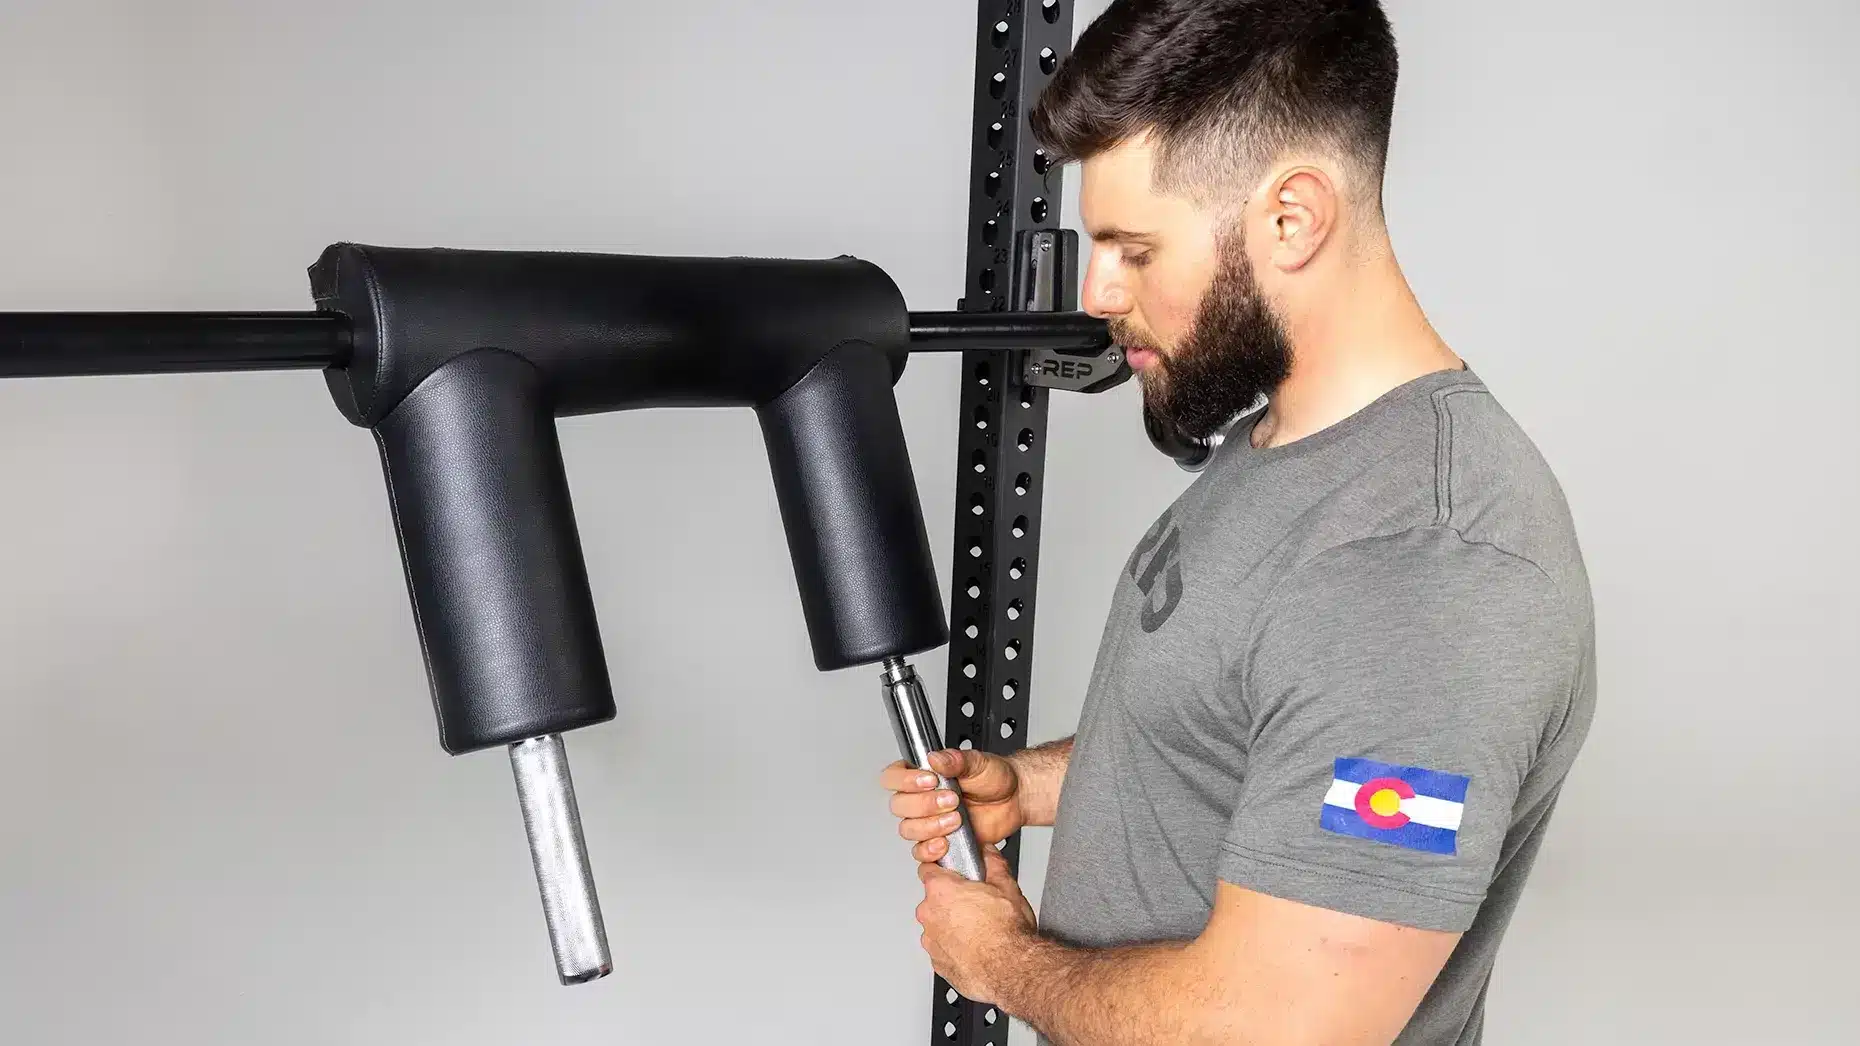 man unscrewing the knurled handles on a safety squat bar